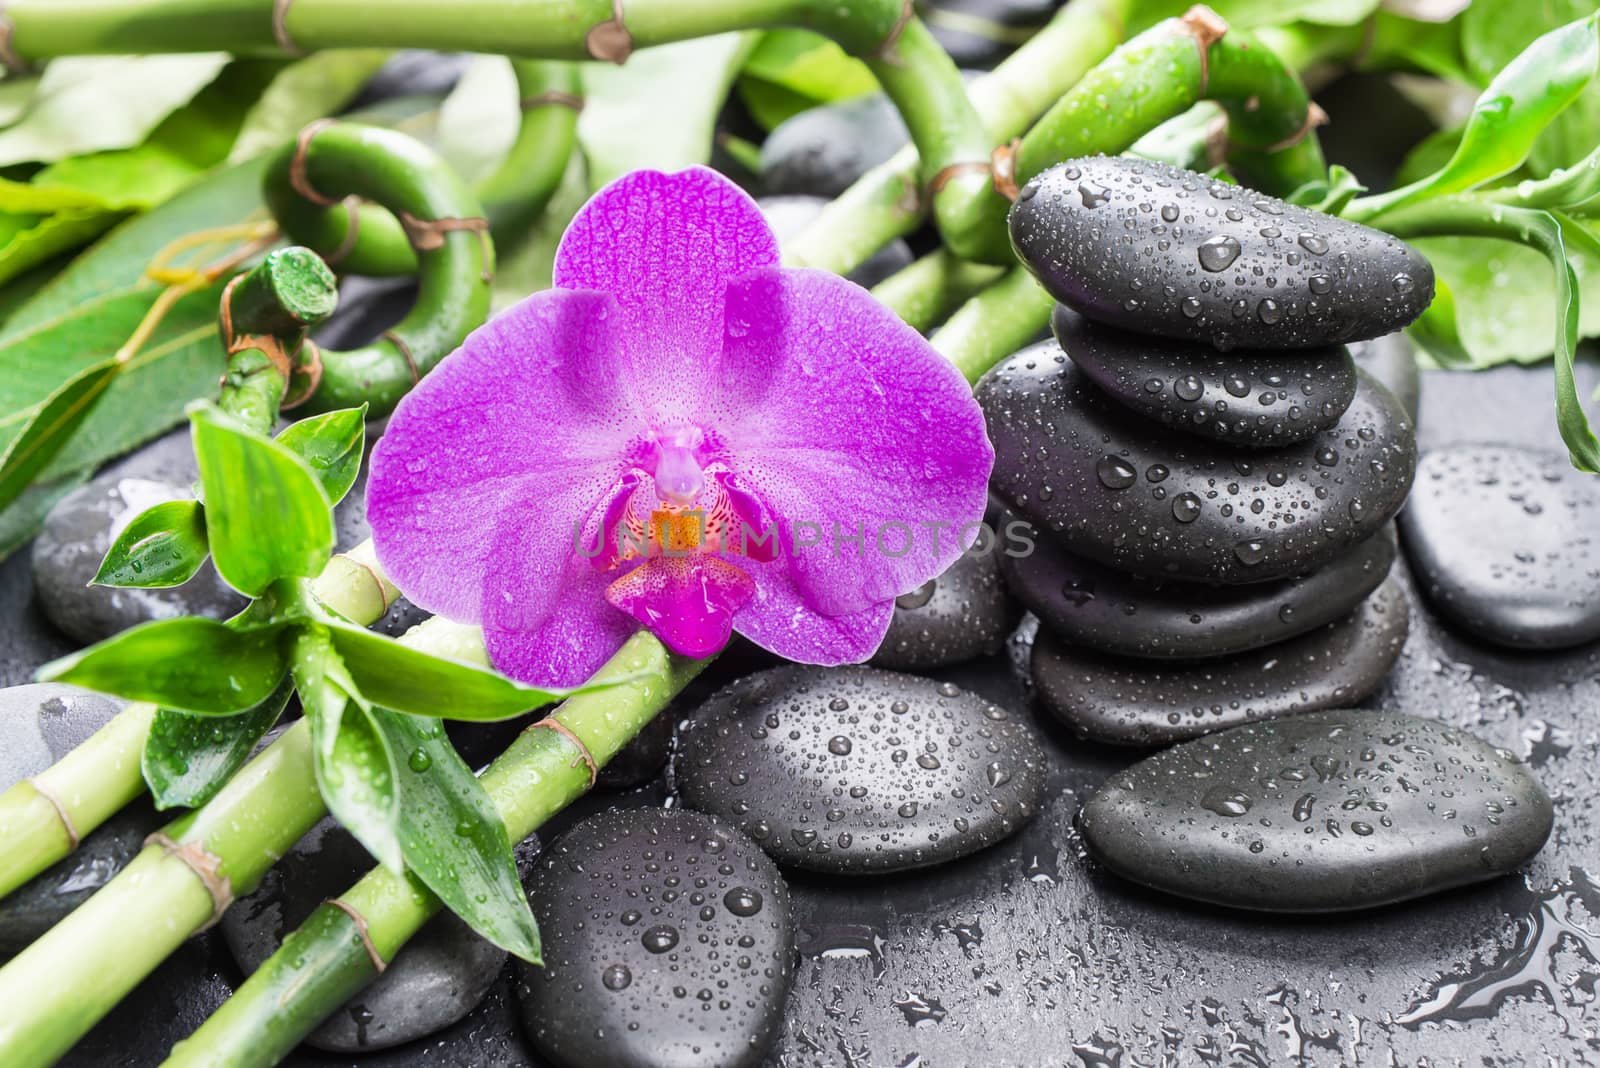 Spa concept with black basalt massage stones, pink orchid flower and lush green foliage covered with water drops on a black background